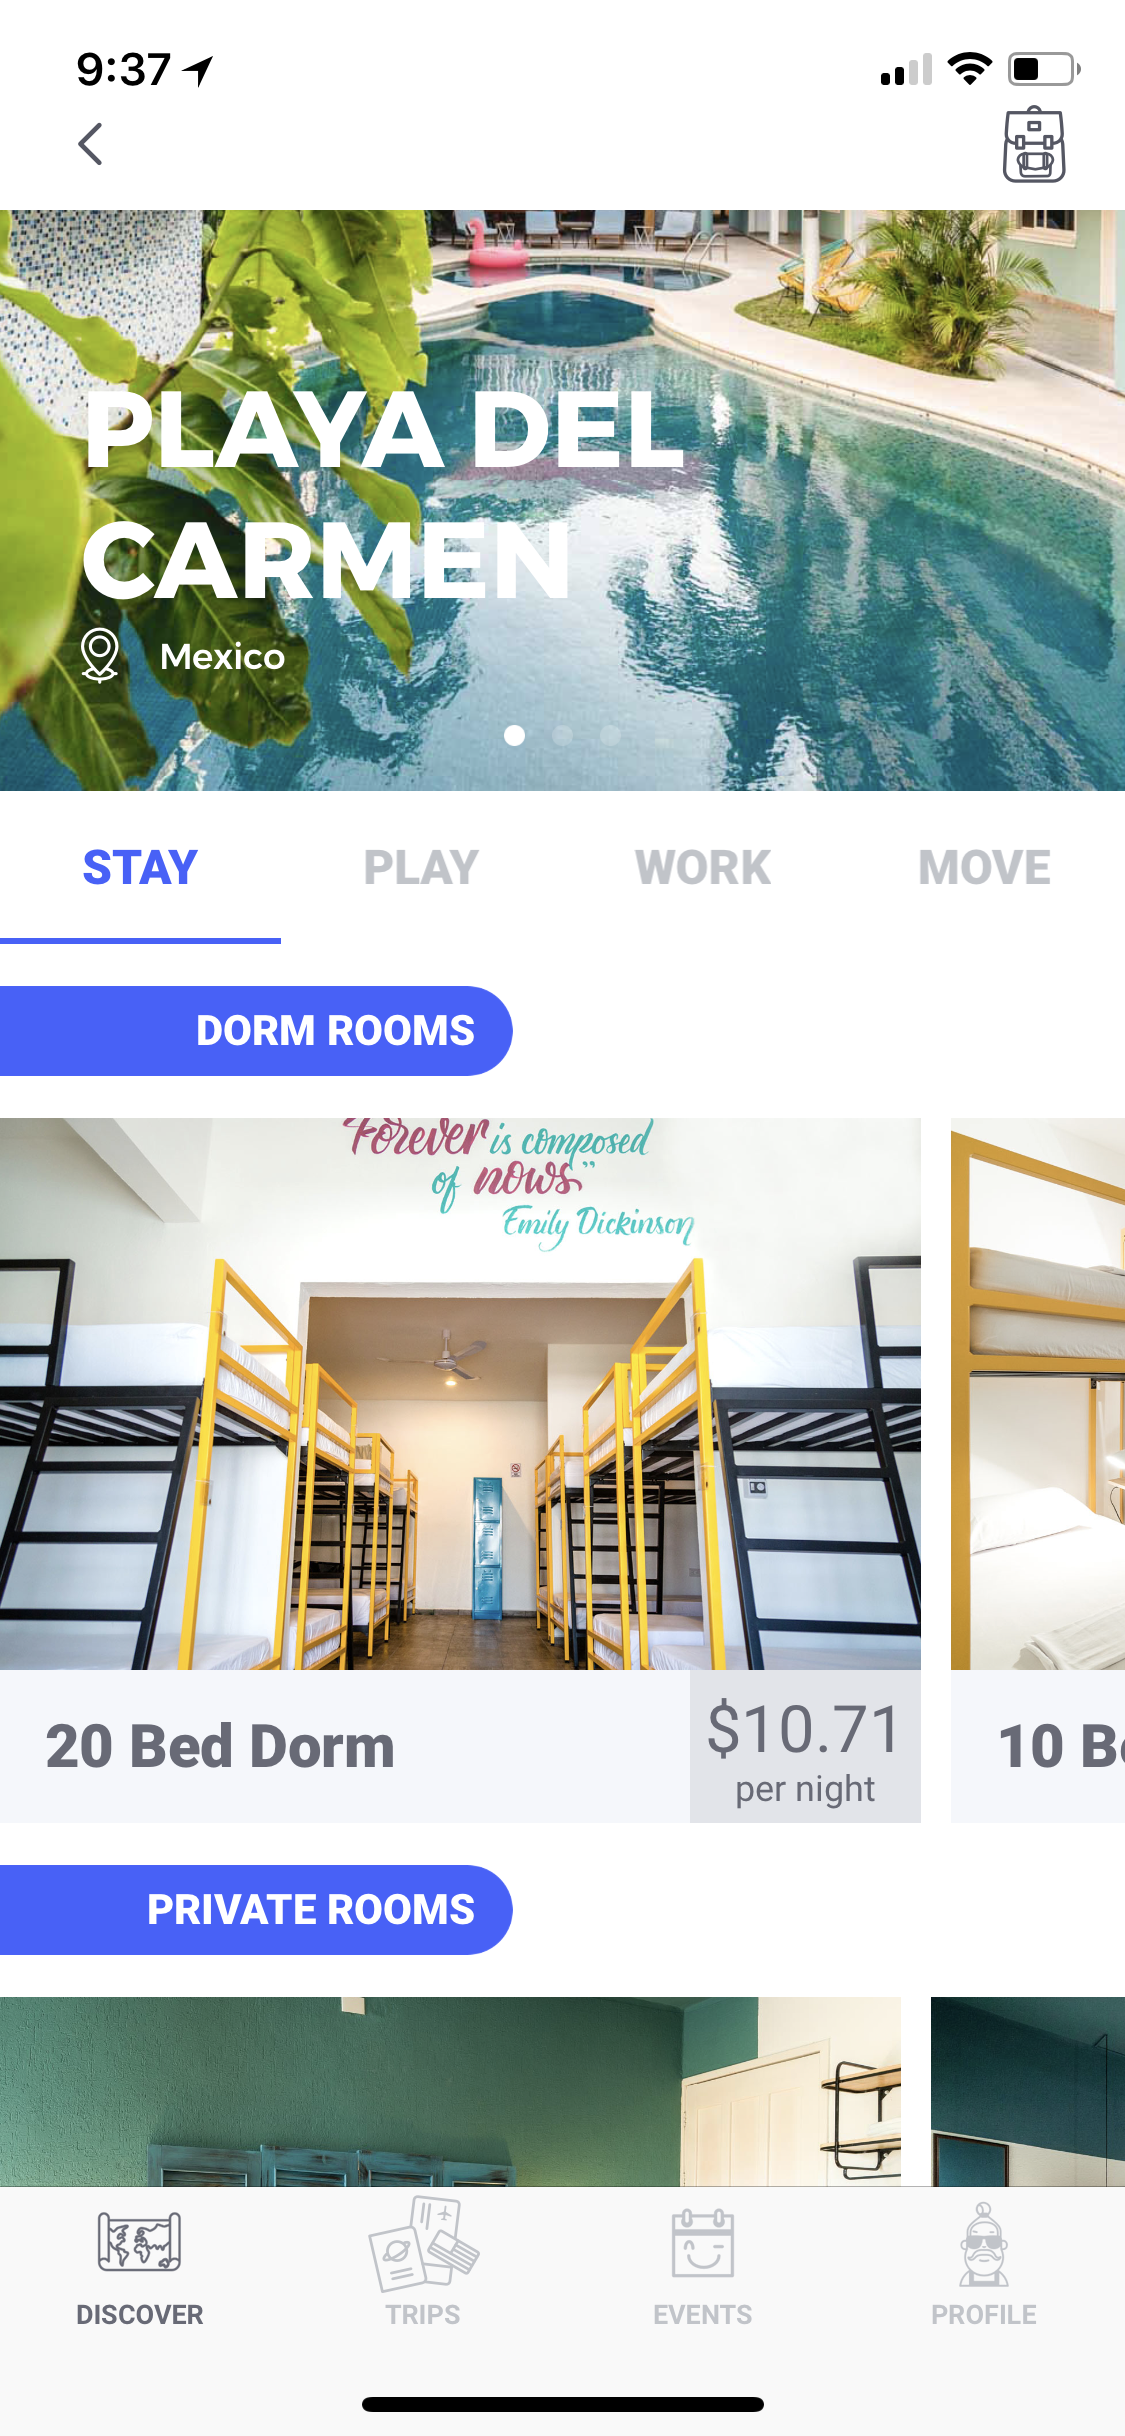 a screenshot of a room with bunk beds